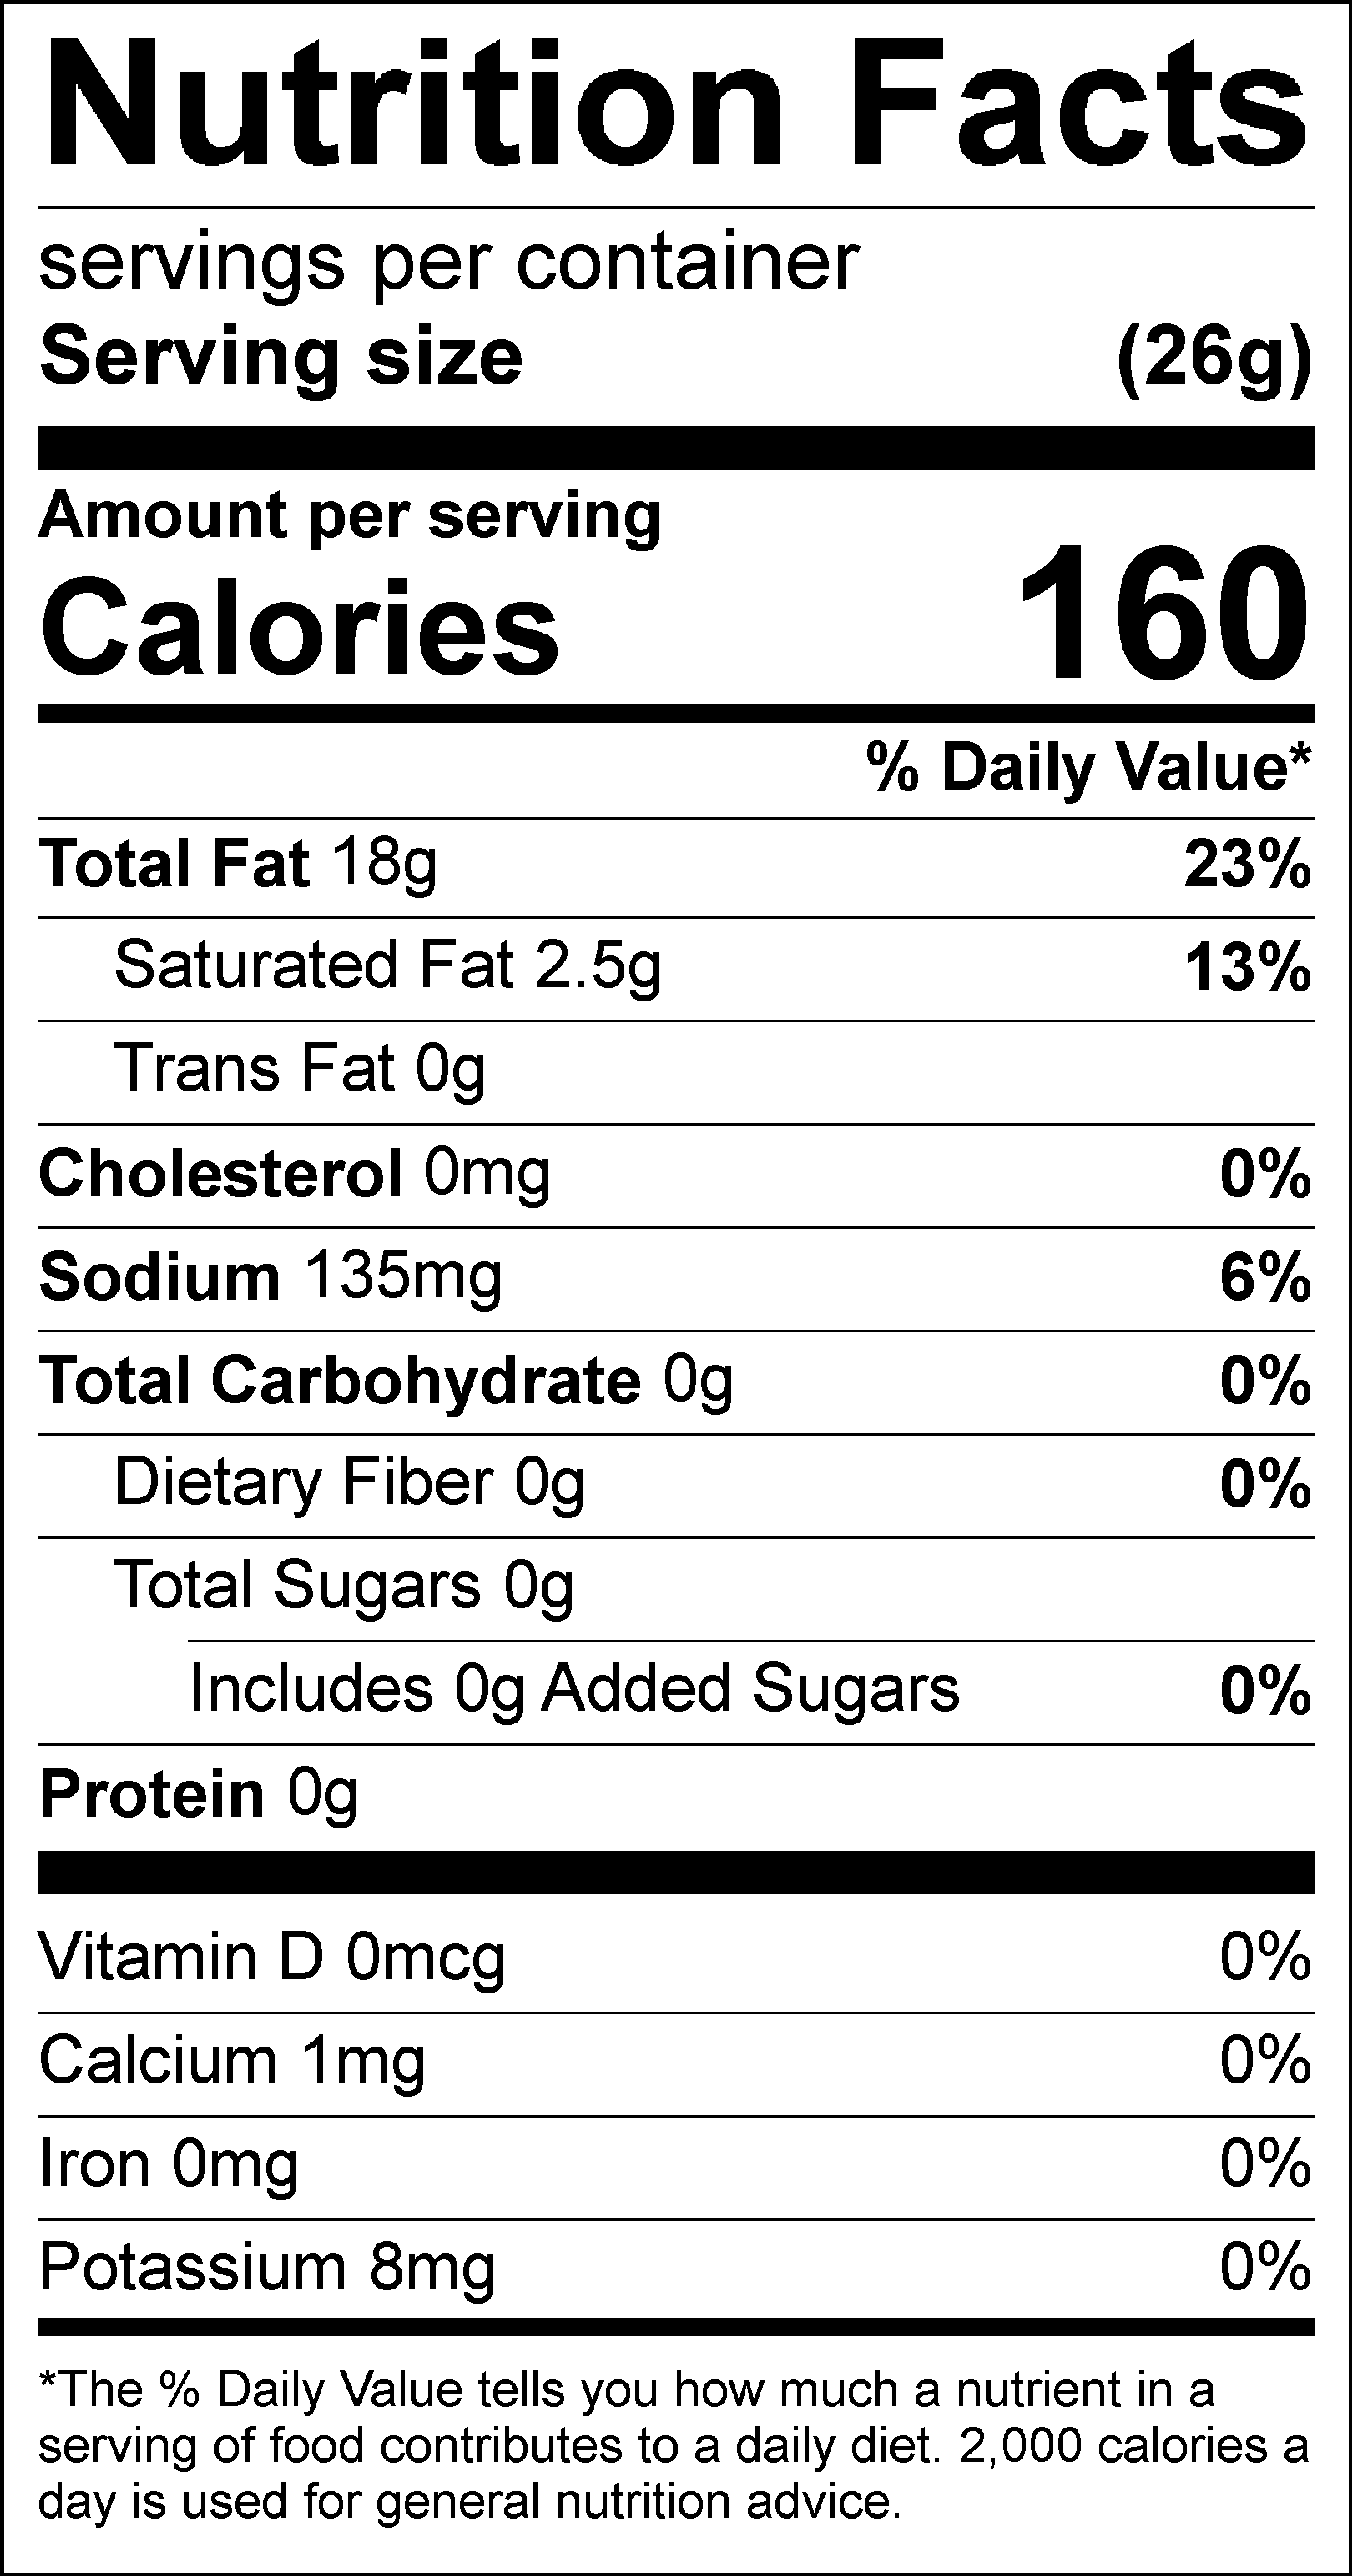 Nutrition Facts Label for Lemony Dressing